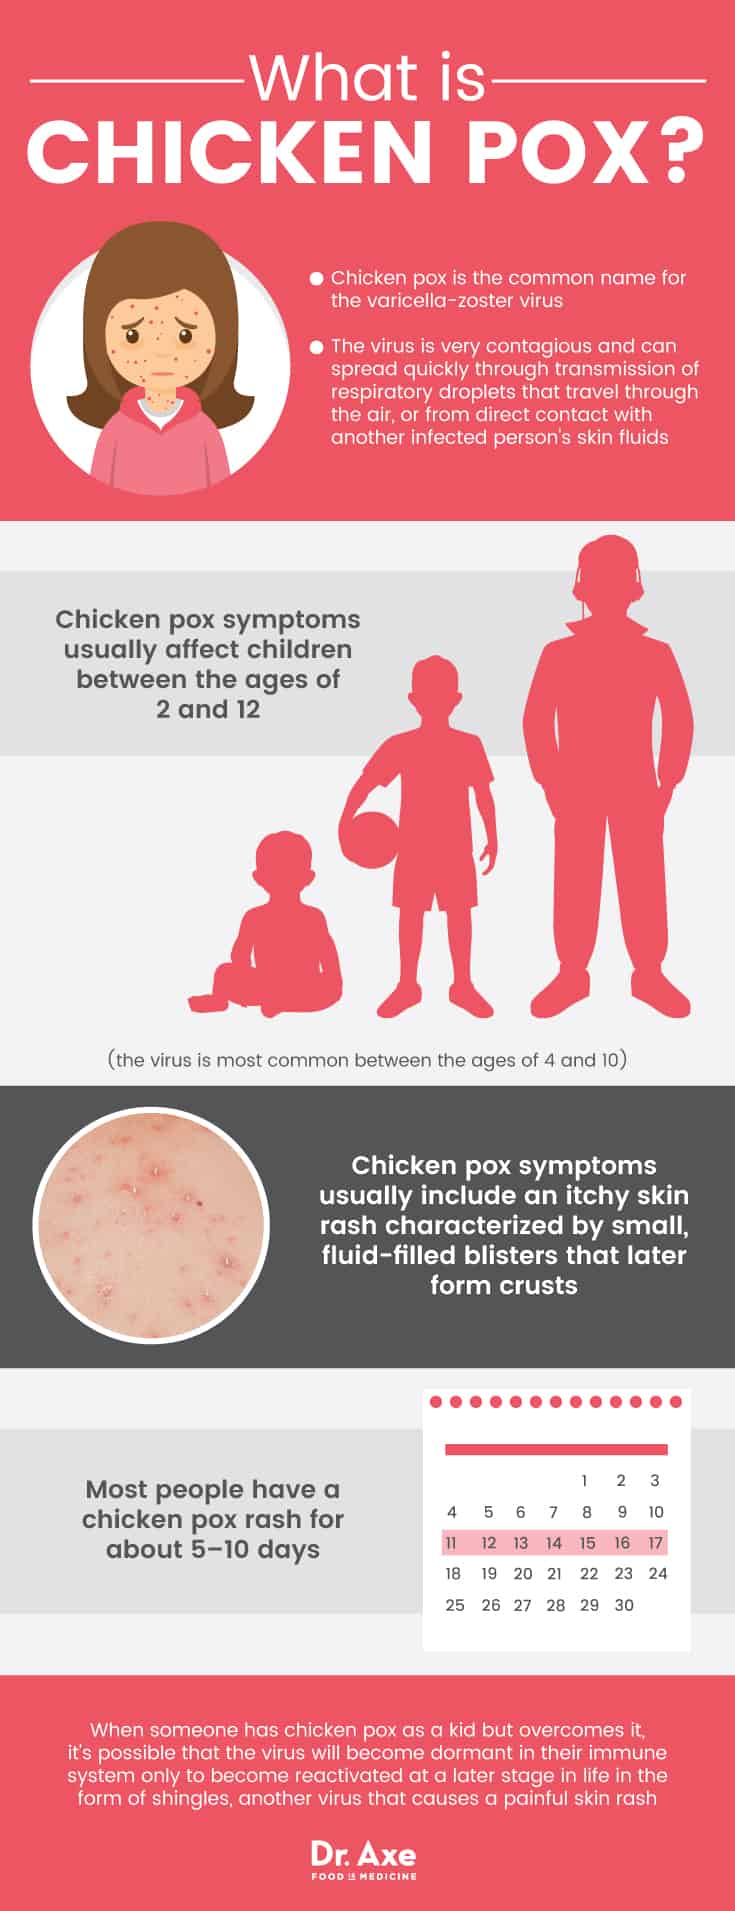 Chicken pox symptoms: What is chicken pox? - Dr. Axe